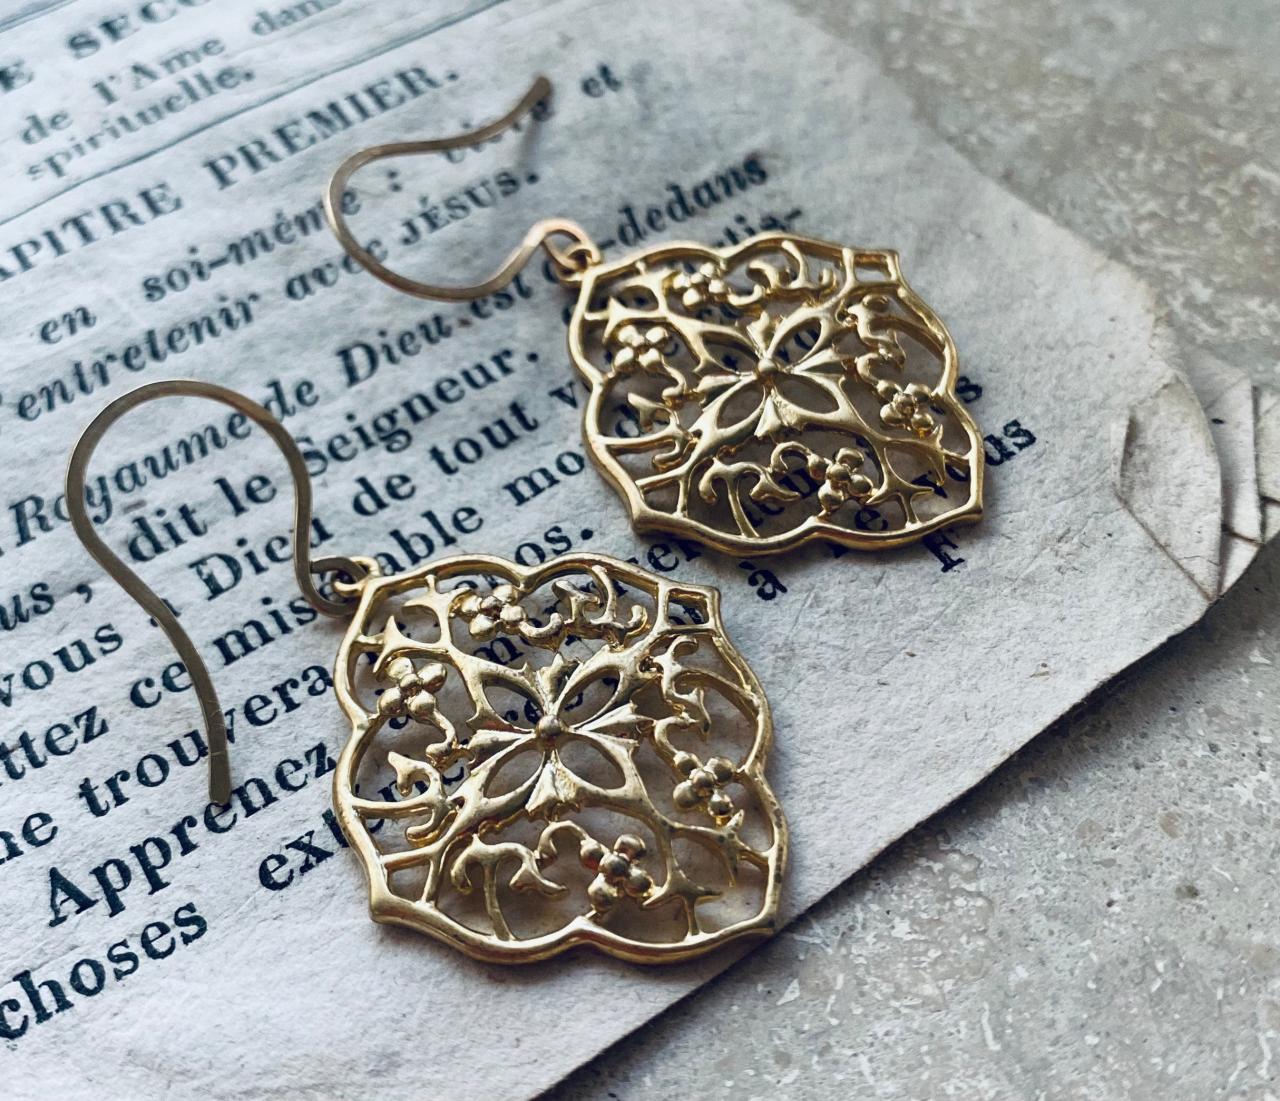 Gold Floral Pendant Earrings Metalworked Jewelry Rhodium Vintage Style Zen Large Dangles Gifts Under 40, Modern Bridesmaid.